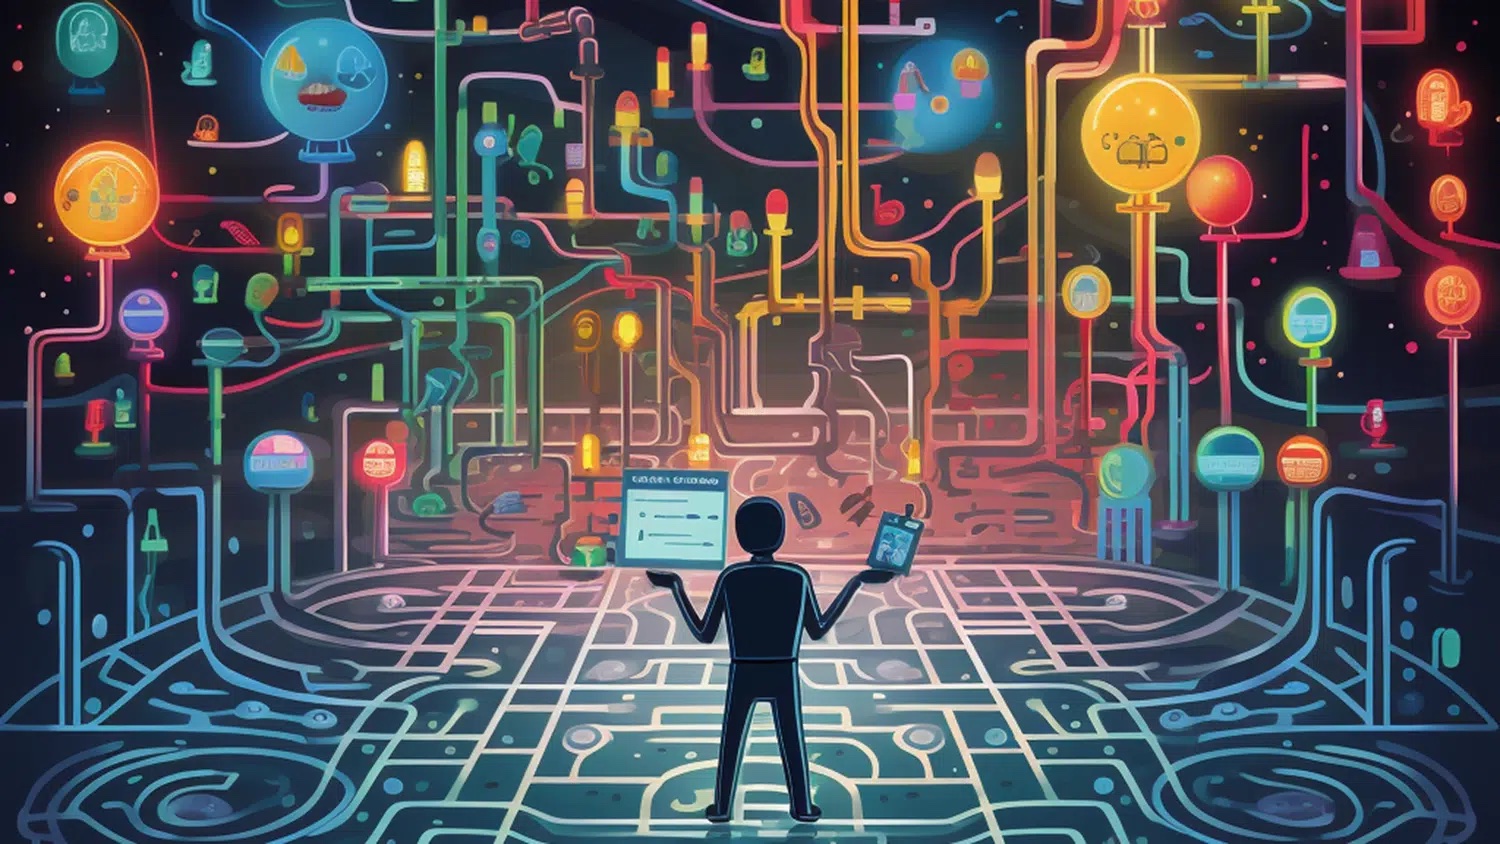 Cartoonish image shows a person holding a computer and looking up at a maze of paths that all lead to different glowing lights.